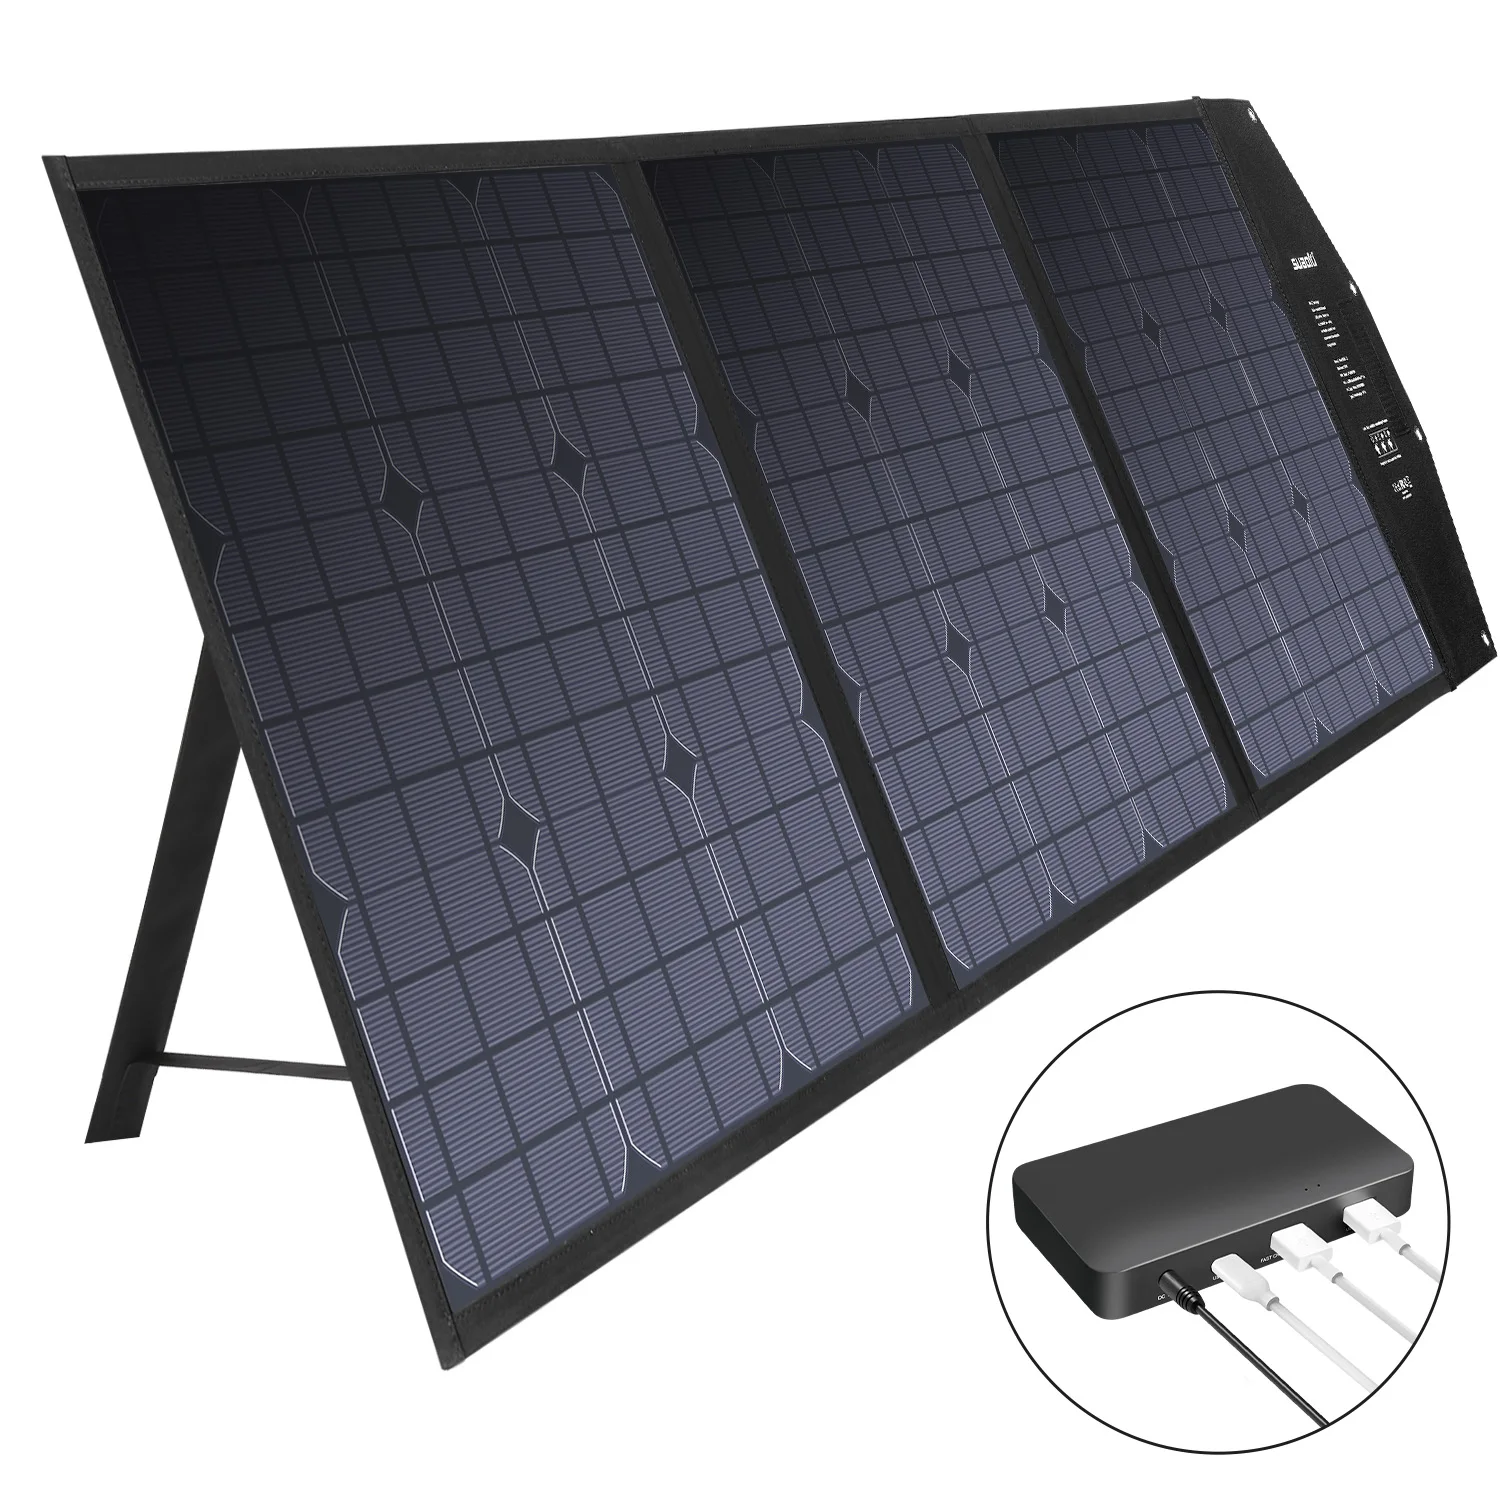 Details about   120W Folding Solar Panel Portable Generator Power Station With USB Charger Bank' 